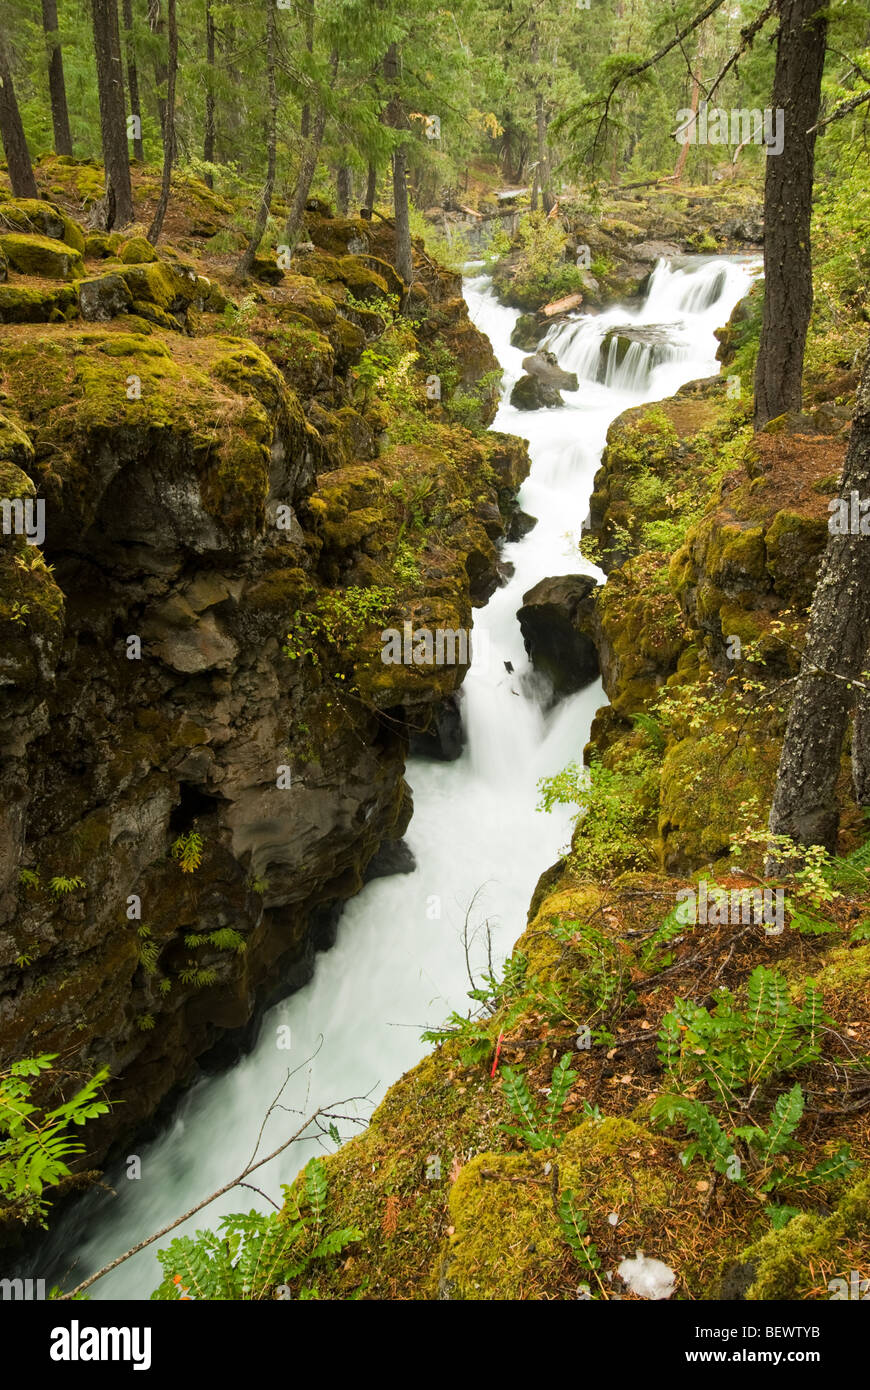 The Rogue River from the Rogue Gorge Interpretive trail, Oregon. Stock Photo